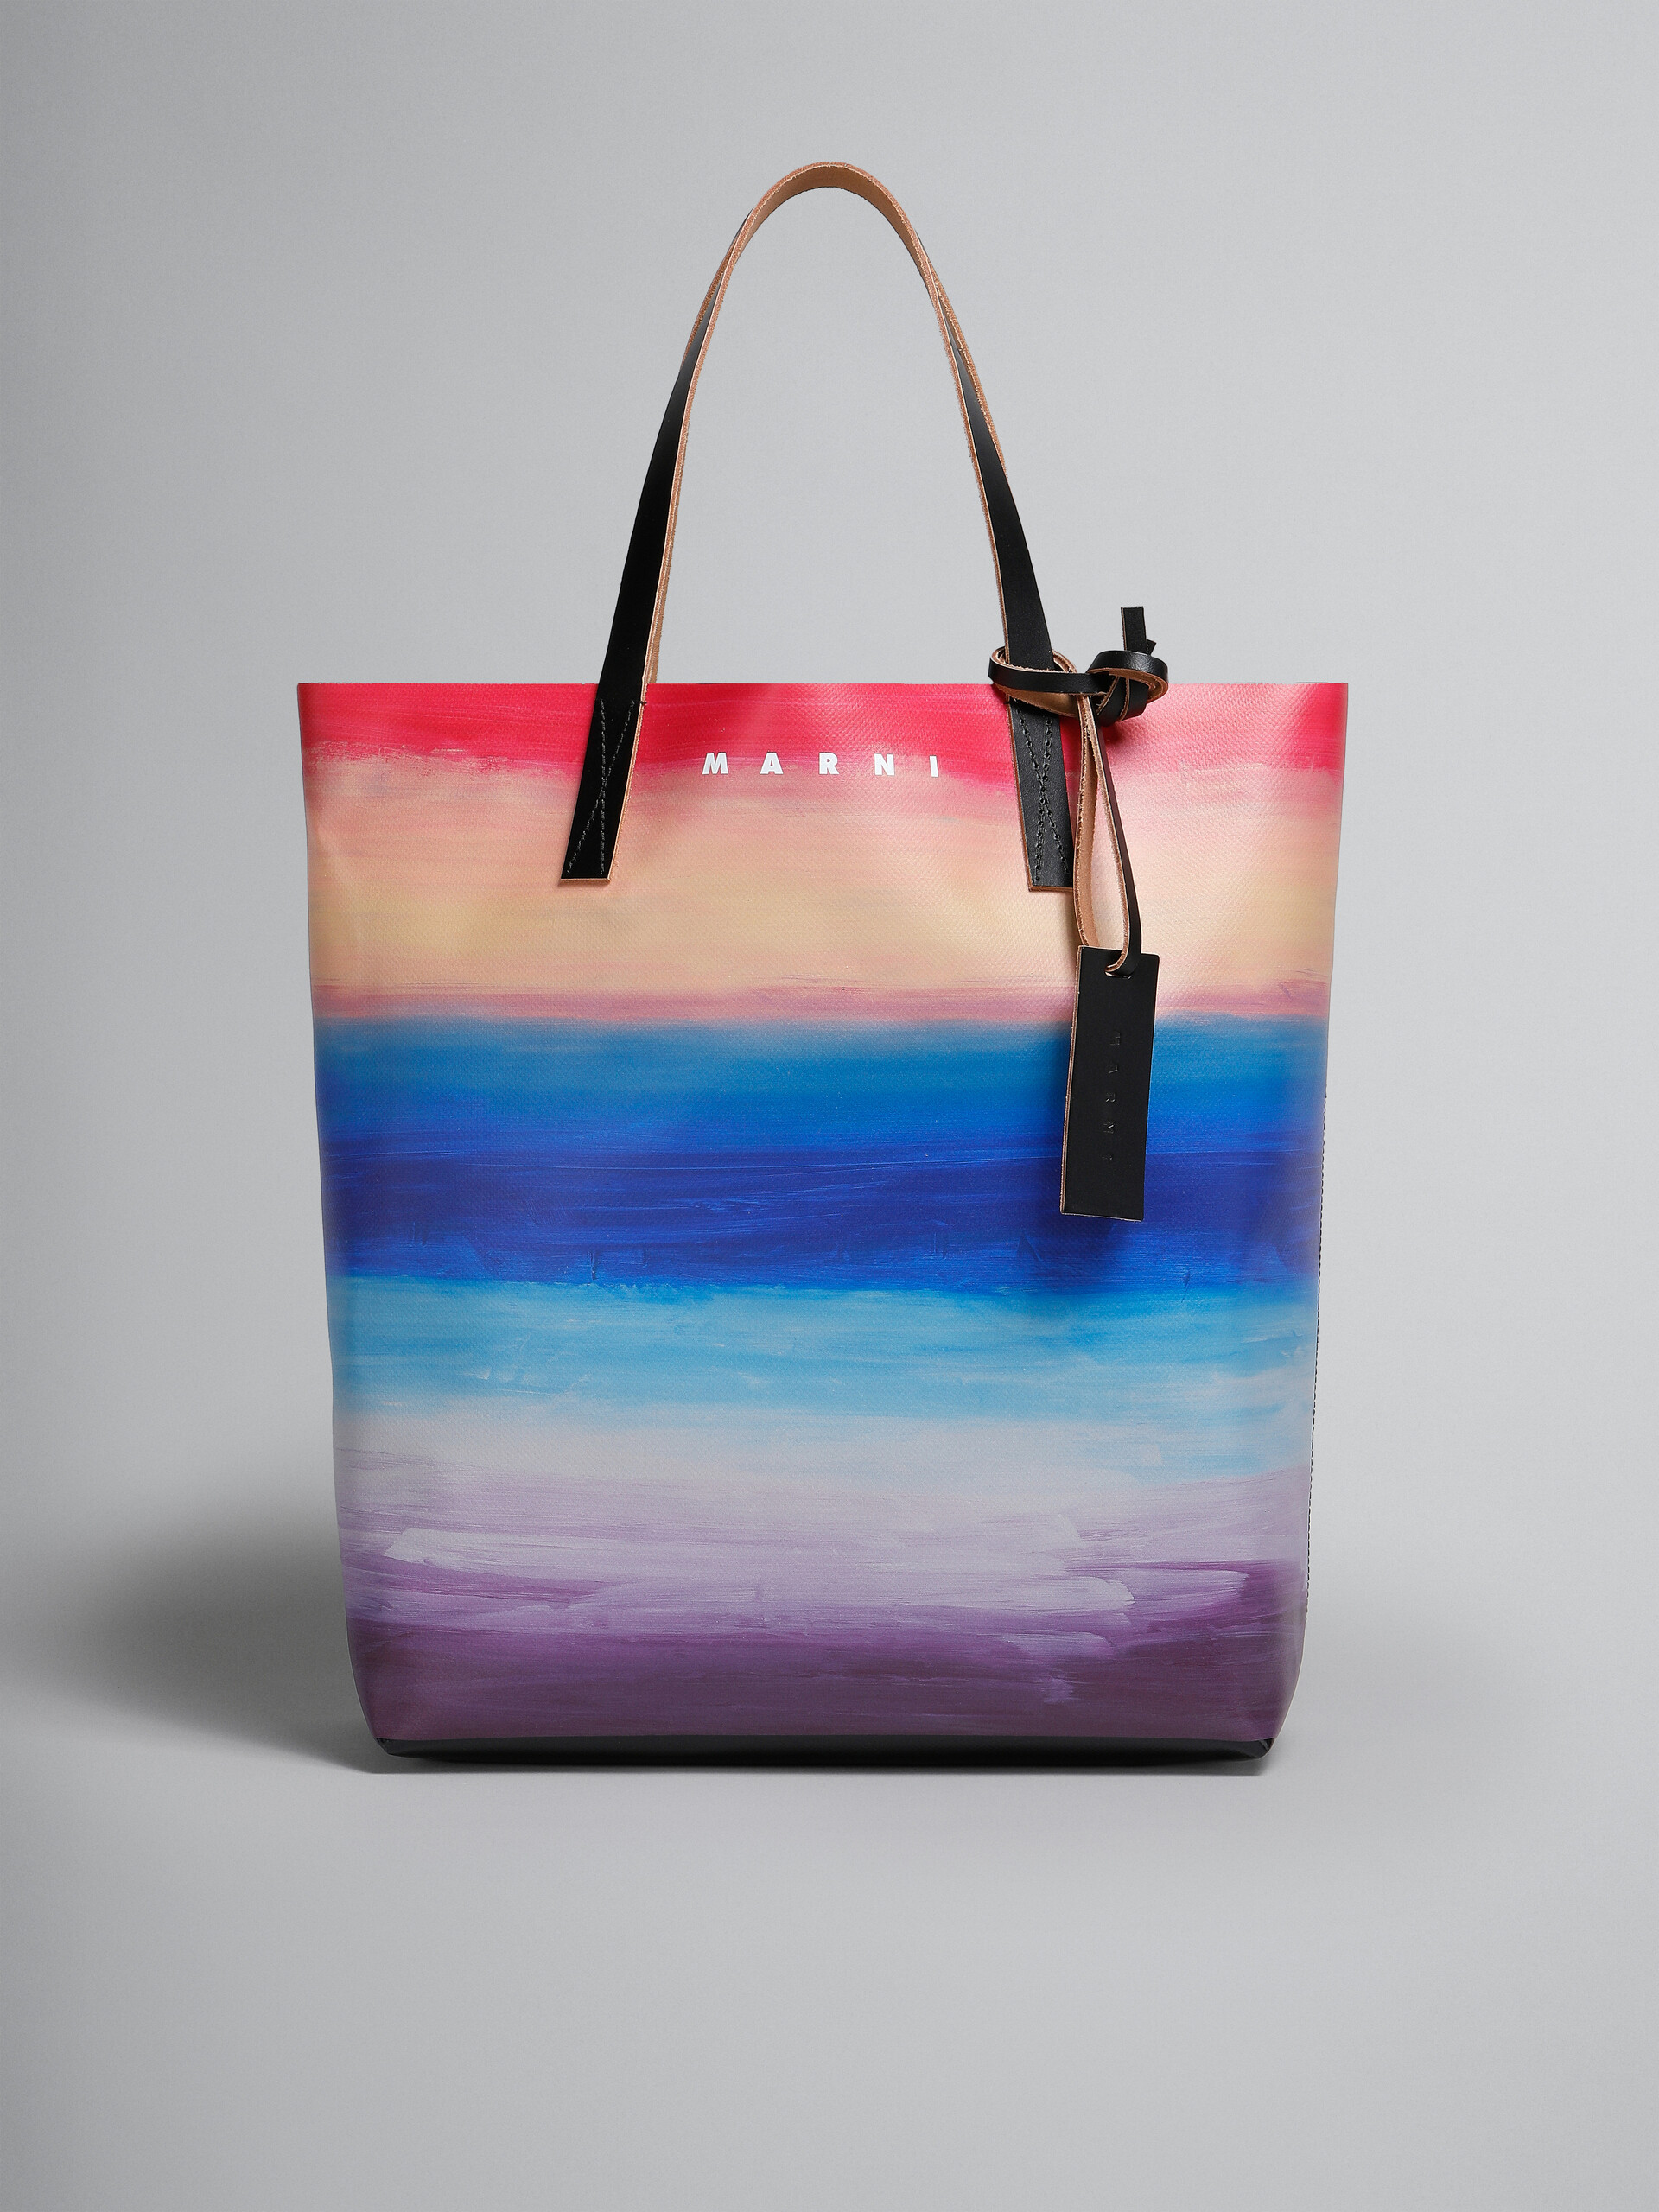 Tribeca shopping bag with Dark Side of the Moon print - Shopping Bags - Image 1